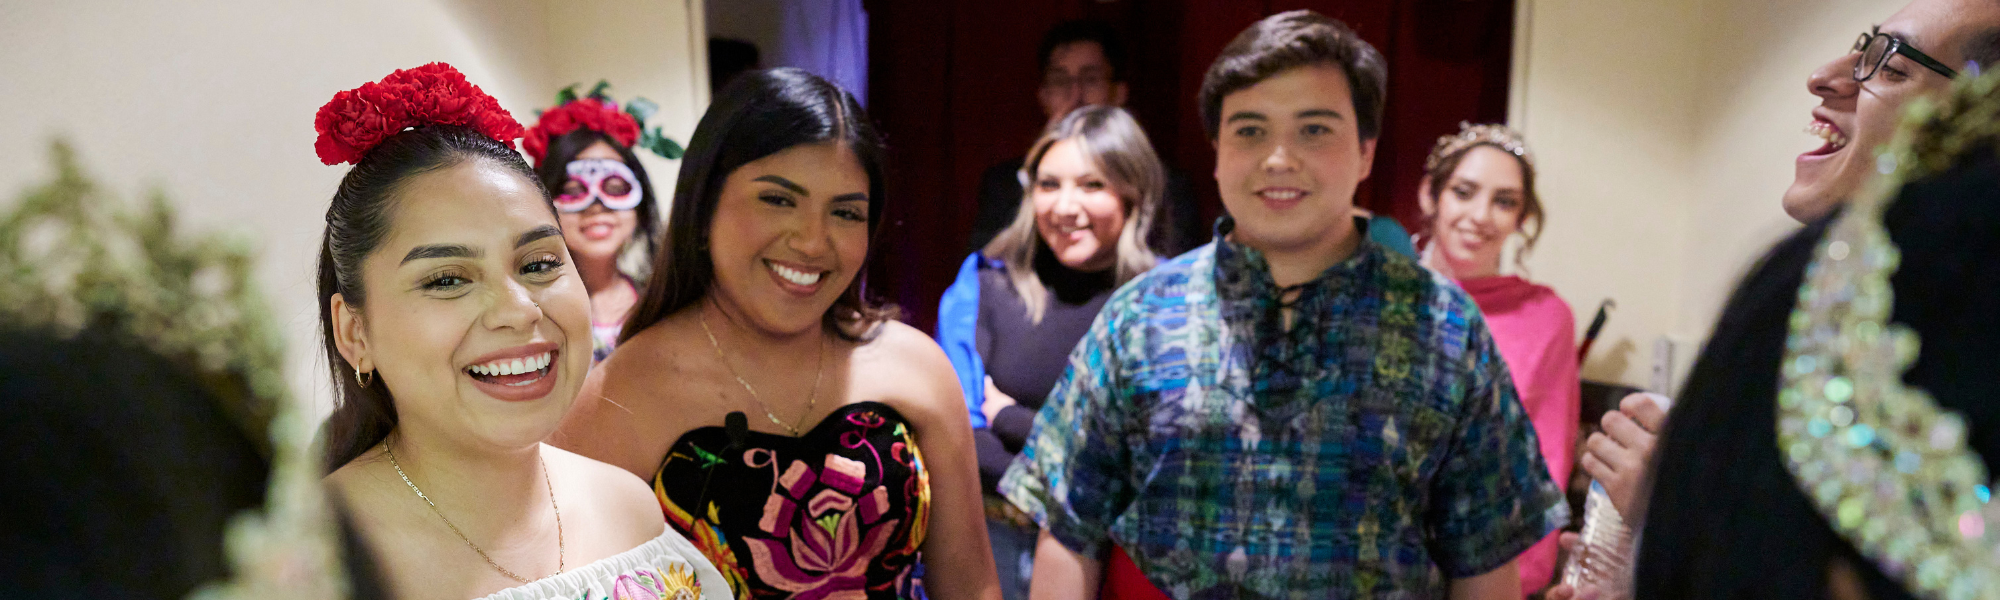 Students smiling and laughing backstage at the OU Hispanic Royalty Pageant.